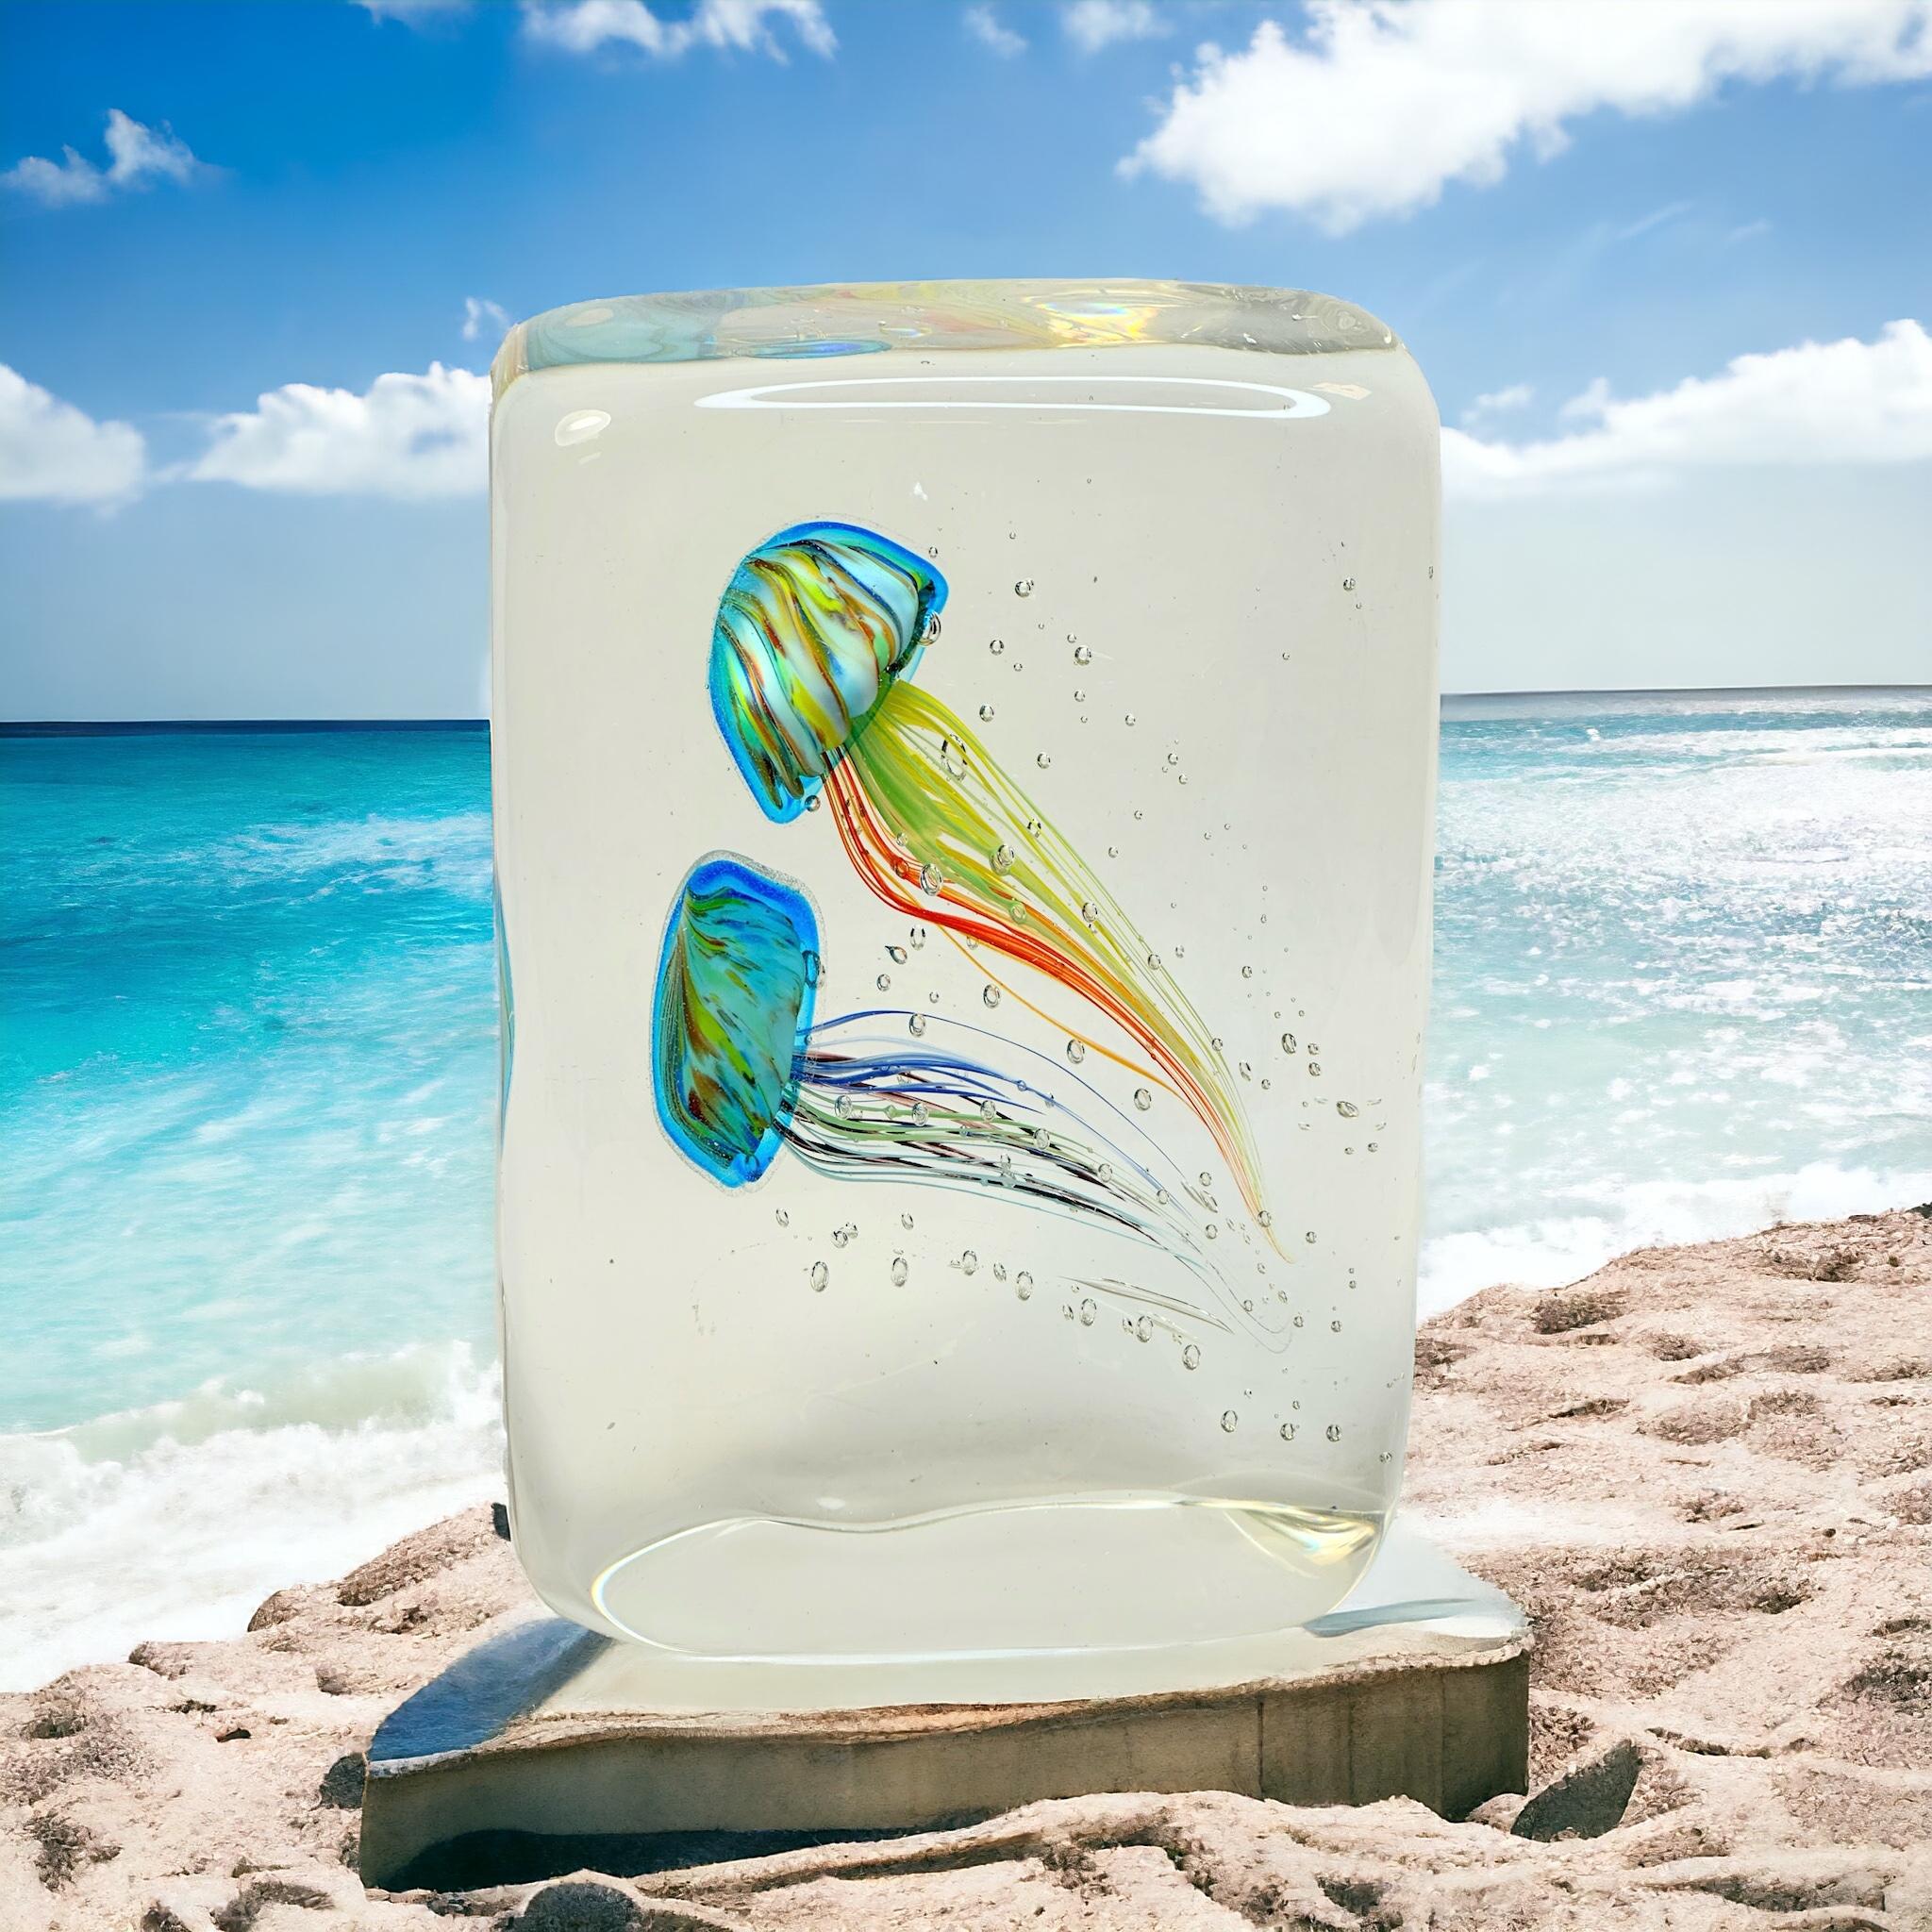 This beautiful stunning large Murano hand blown aquarium design Italian art glass sculpture was most likely made in the 1980s in Italy. It's showing two Jelly Fish inside, in two different colors, floating on controlled bubbles. 
Murano glass is a